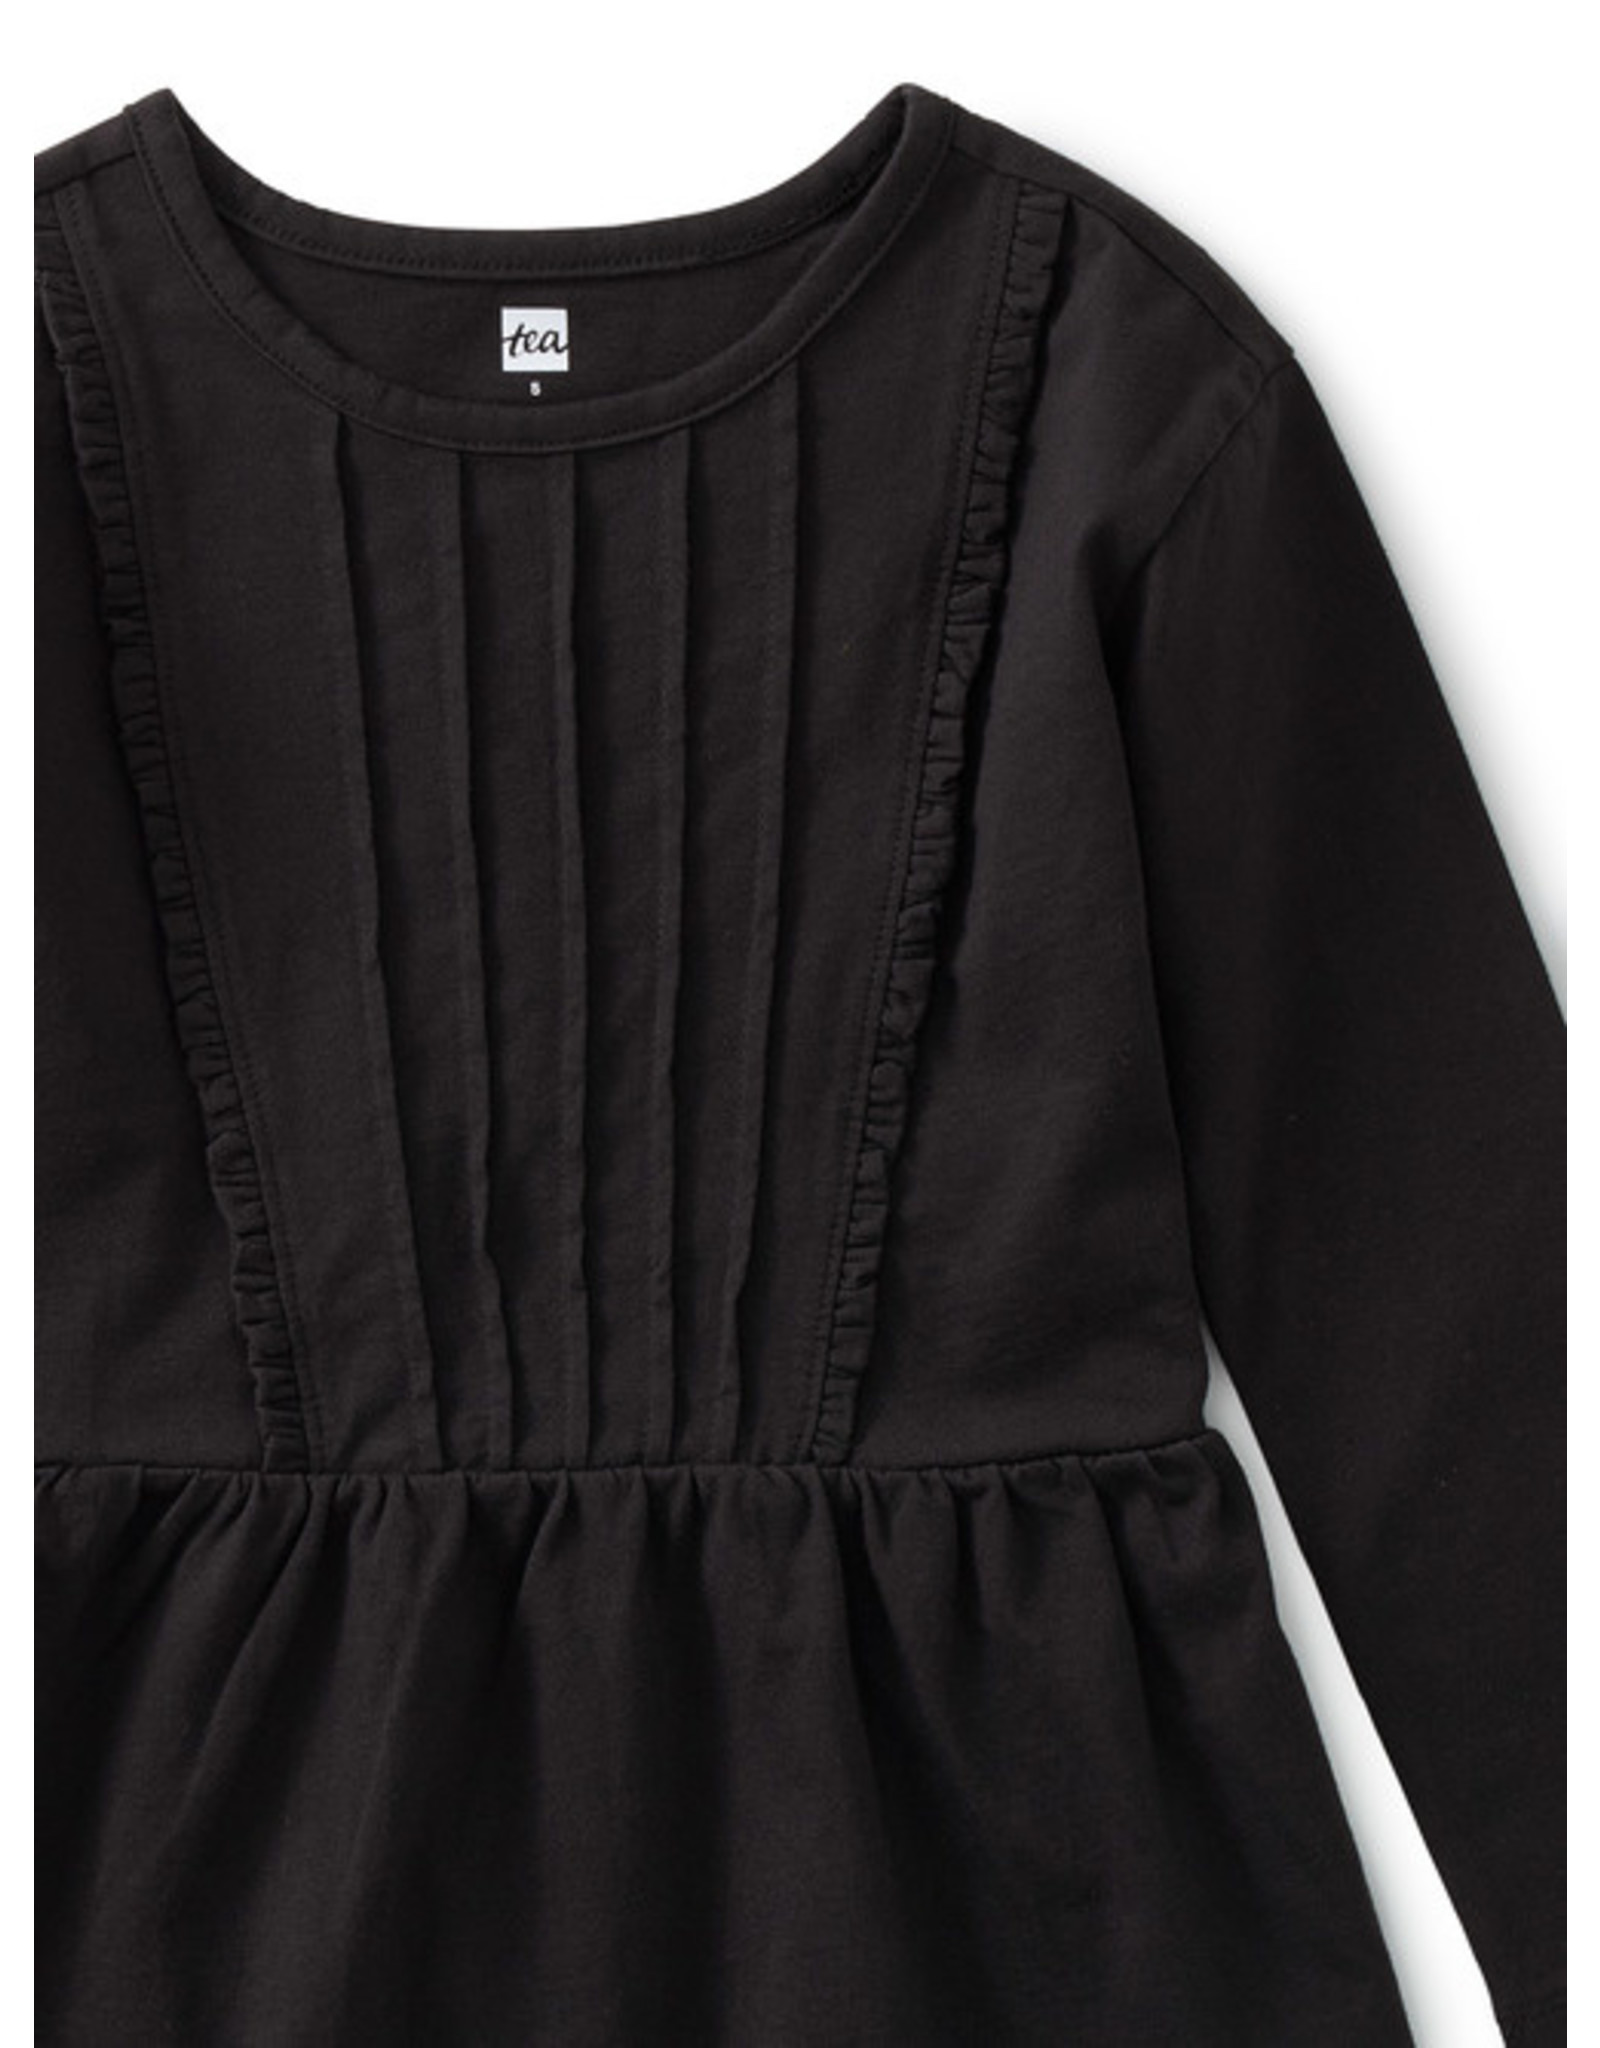 Tea Collection Pleated Pintuck Top - Jet Black